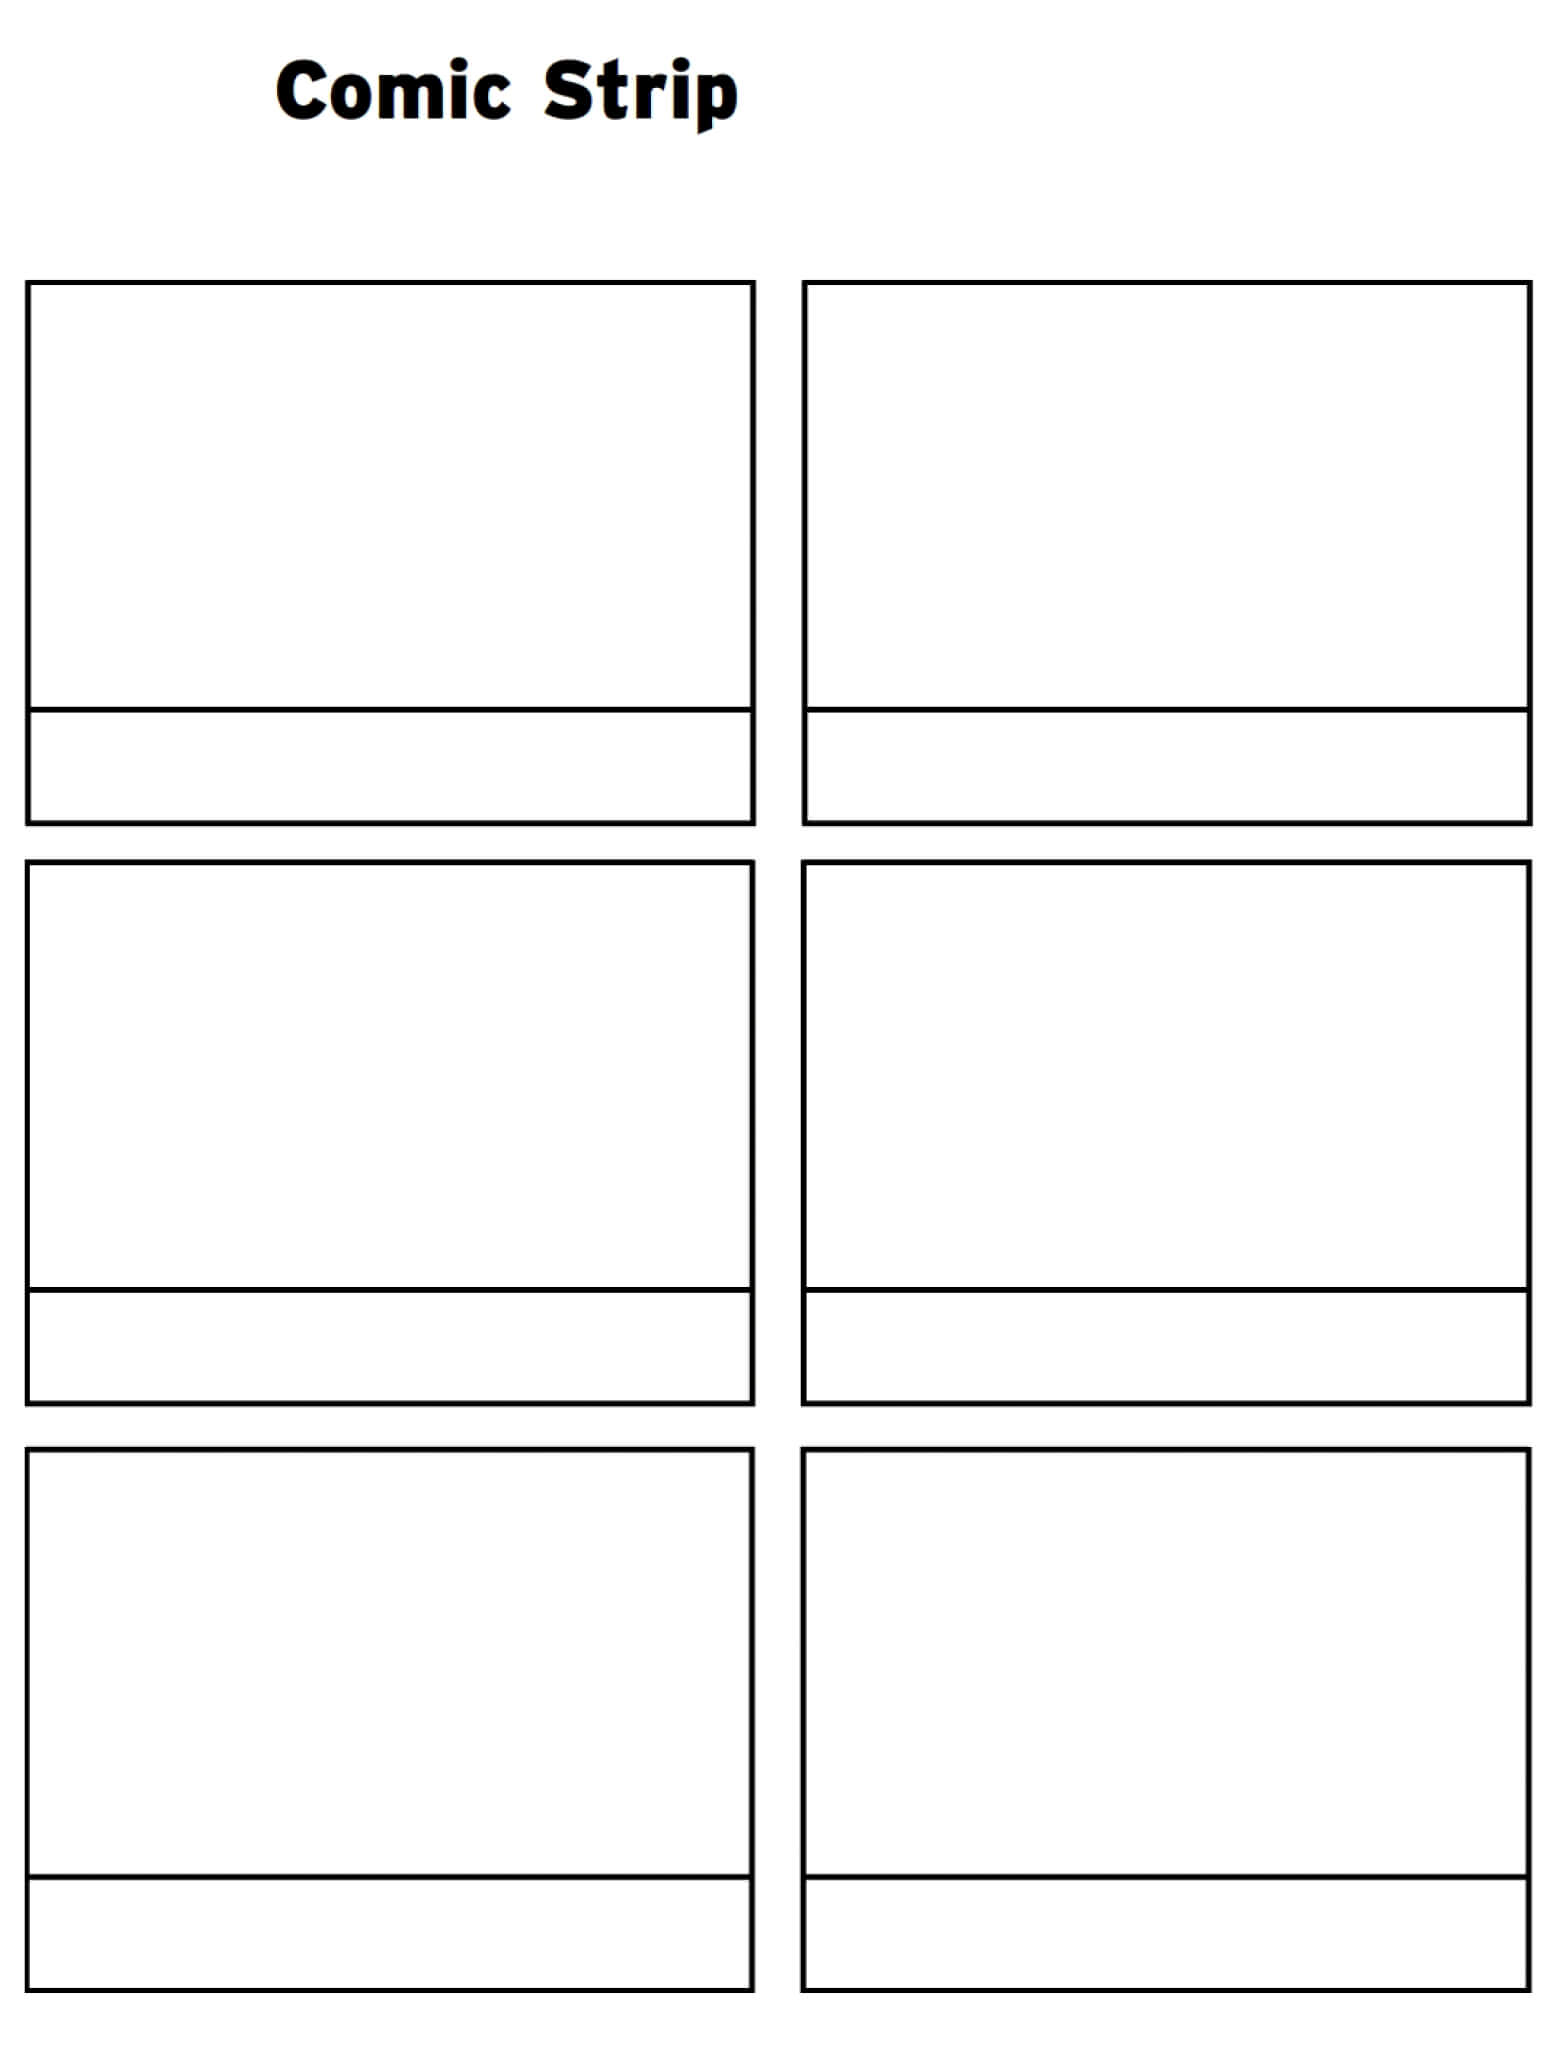 Printable Comic Strip Template Pdf Word Pages | Printable Within Printable Blank Comic Strip Template For Kids